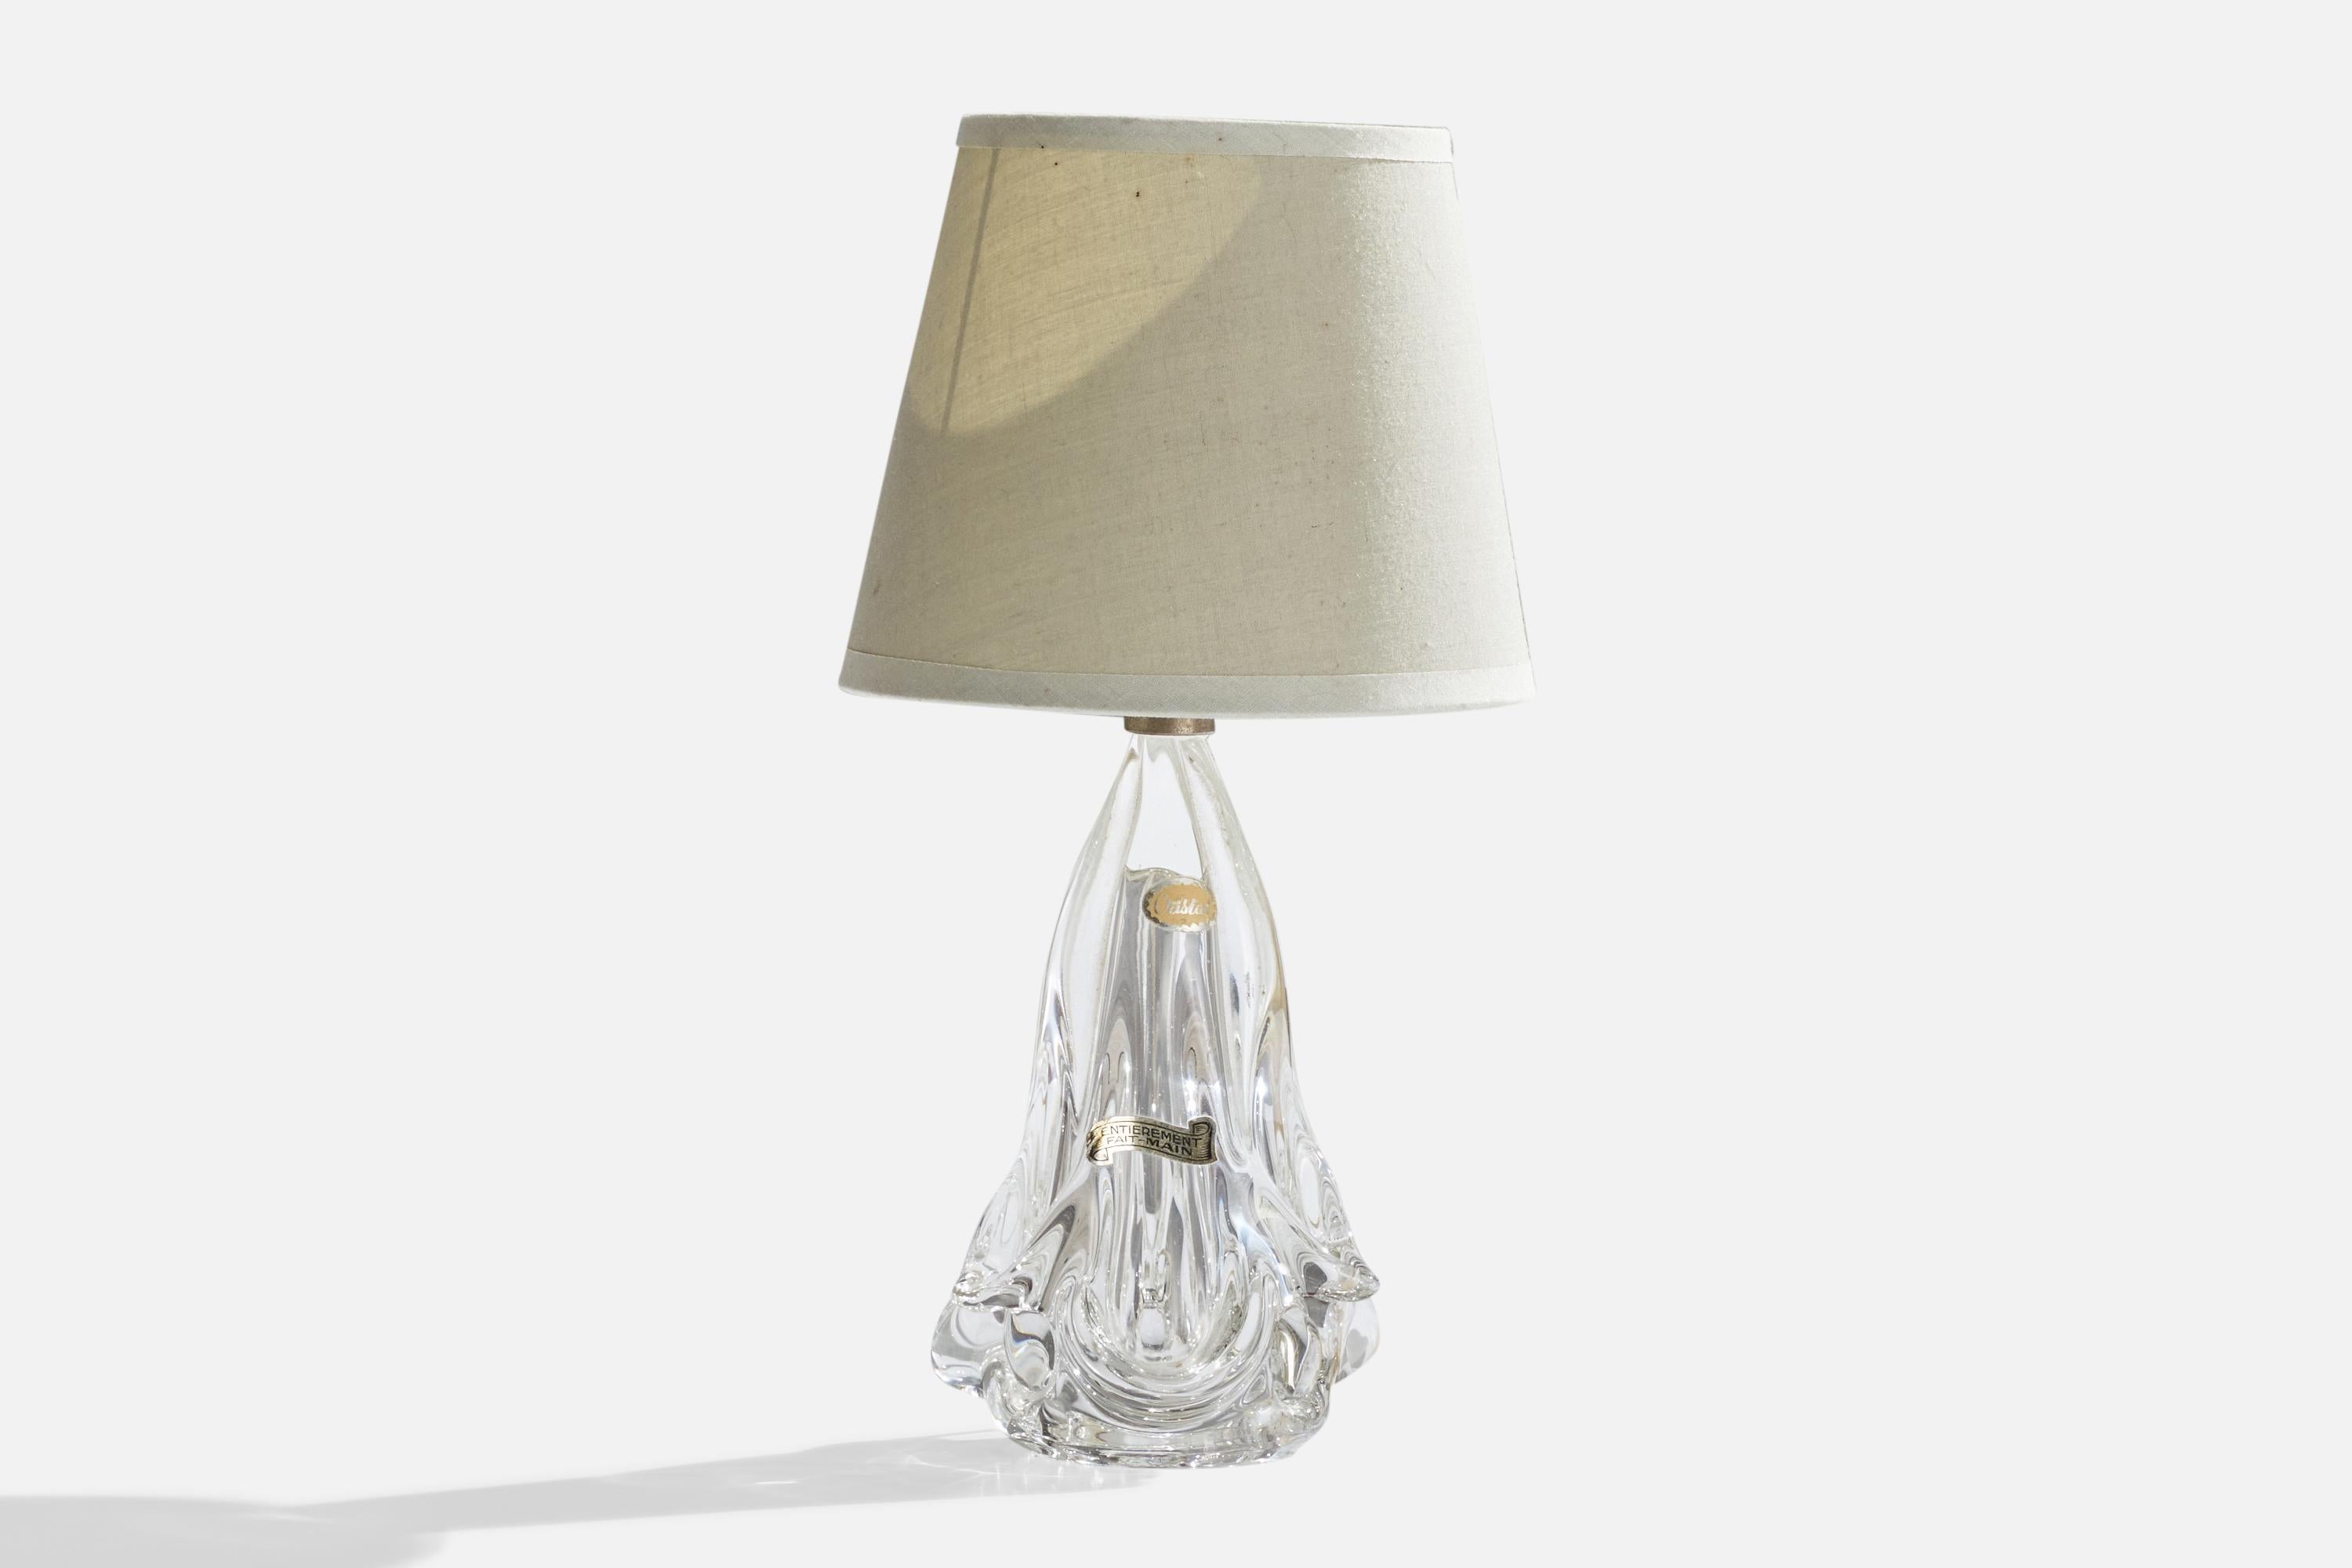 A freeform blown glass and off-white fabric table lamp designed and produced in France, c. 1940s.

Overall Dimensions (inches): 12.5” H x 6.75” D
Stated dimensions include shade.
Bulb Specifications: E-14 Bulb
Number of Sockets: 1
All lighting will